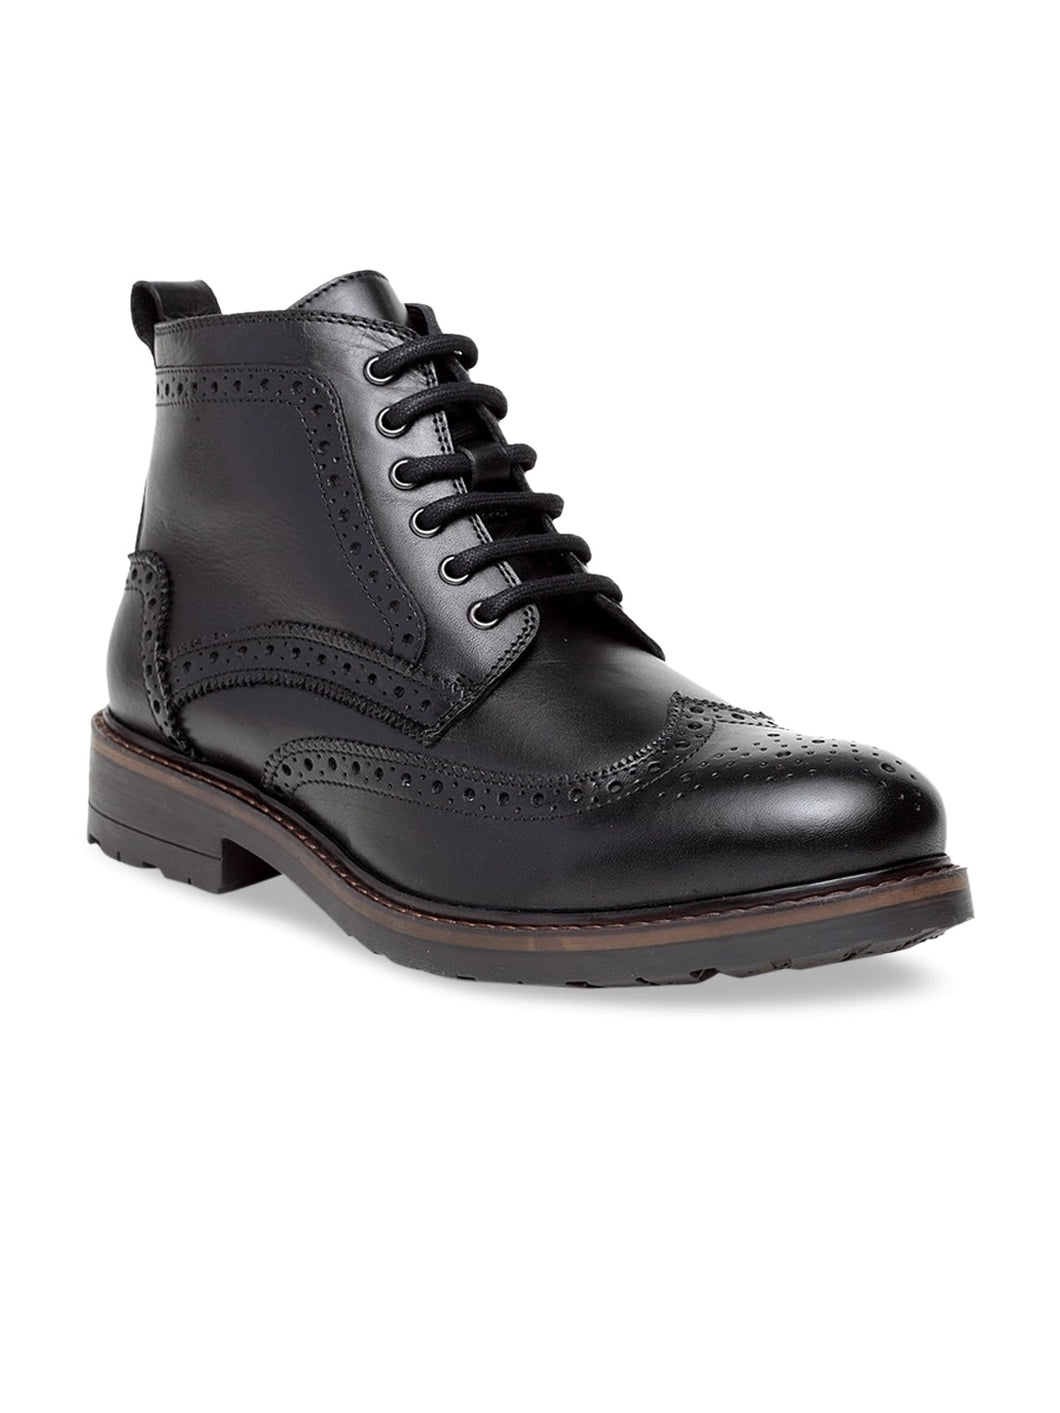 Men Black Solid Leather Round Toe Mid-Top Flat Boots